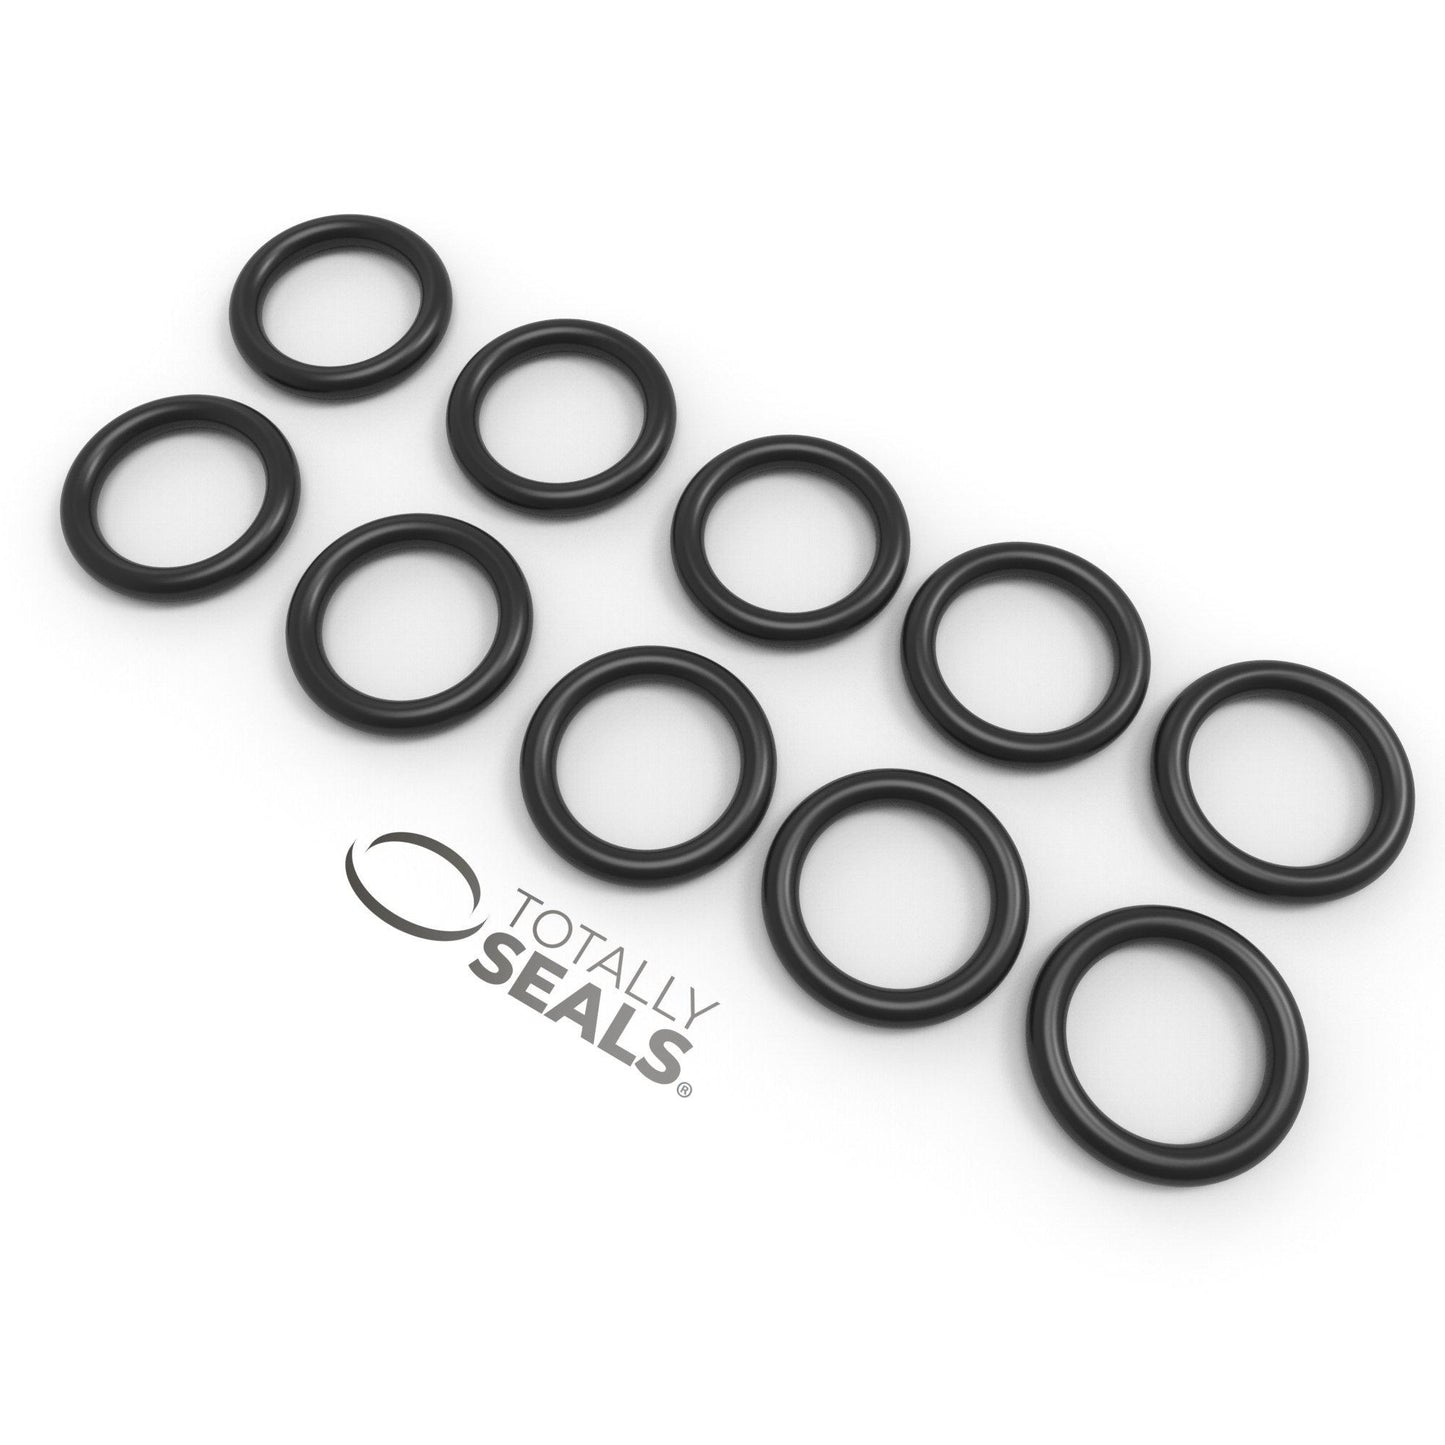 9mm x 1mm (11mm OD) Nitrile O-Rings - Totally Seals®